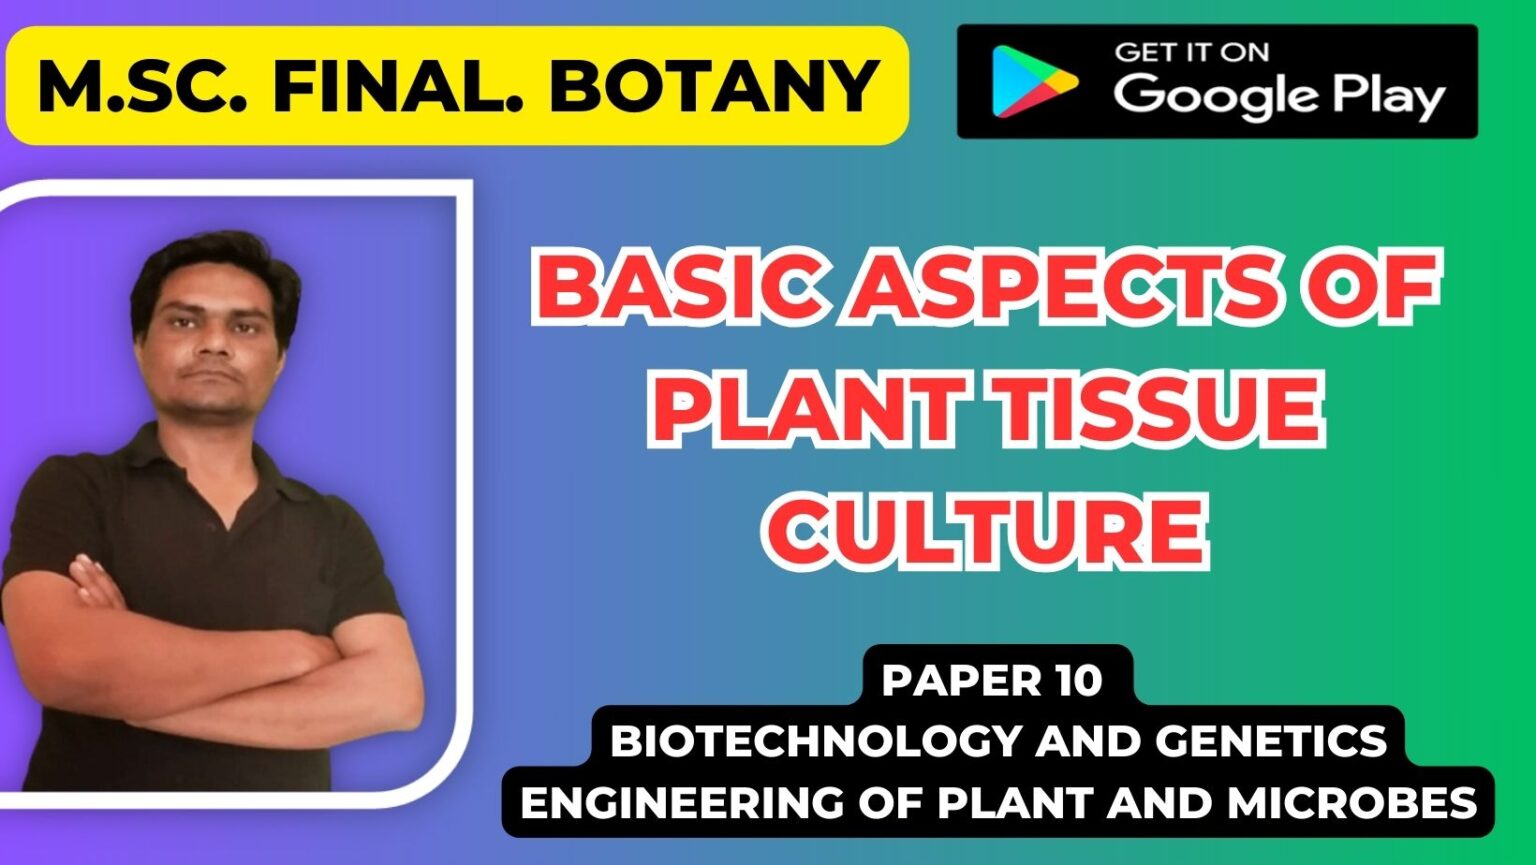 Basic Aspects of Plant Tissue culture